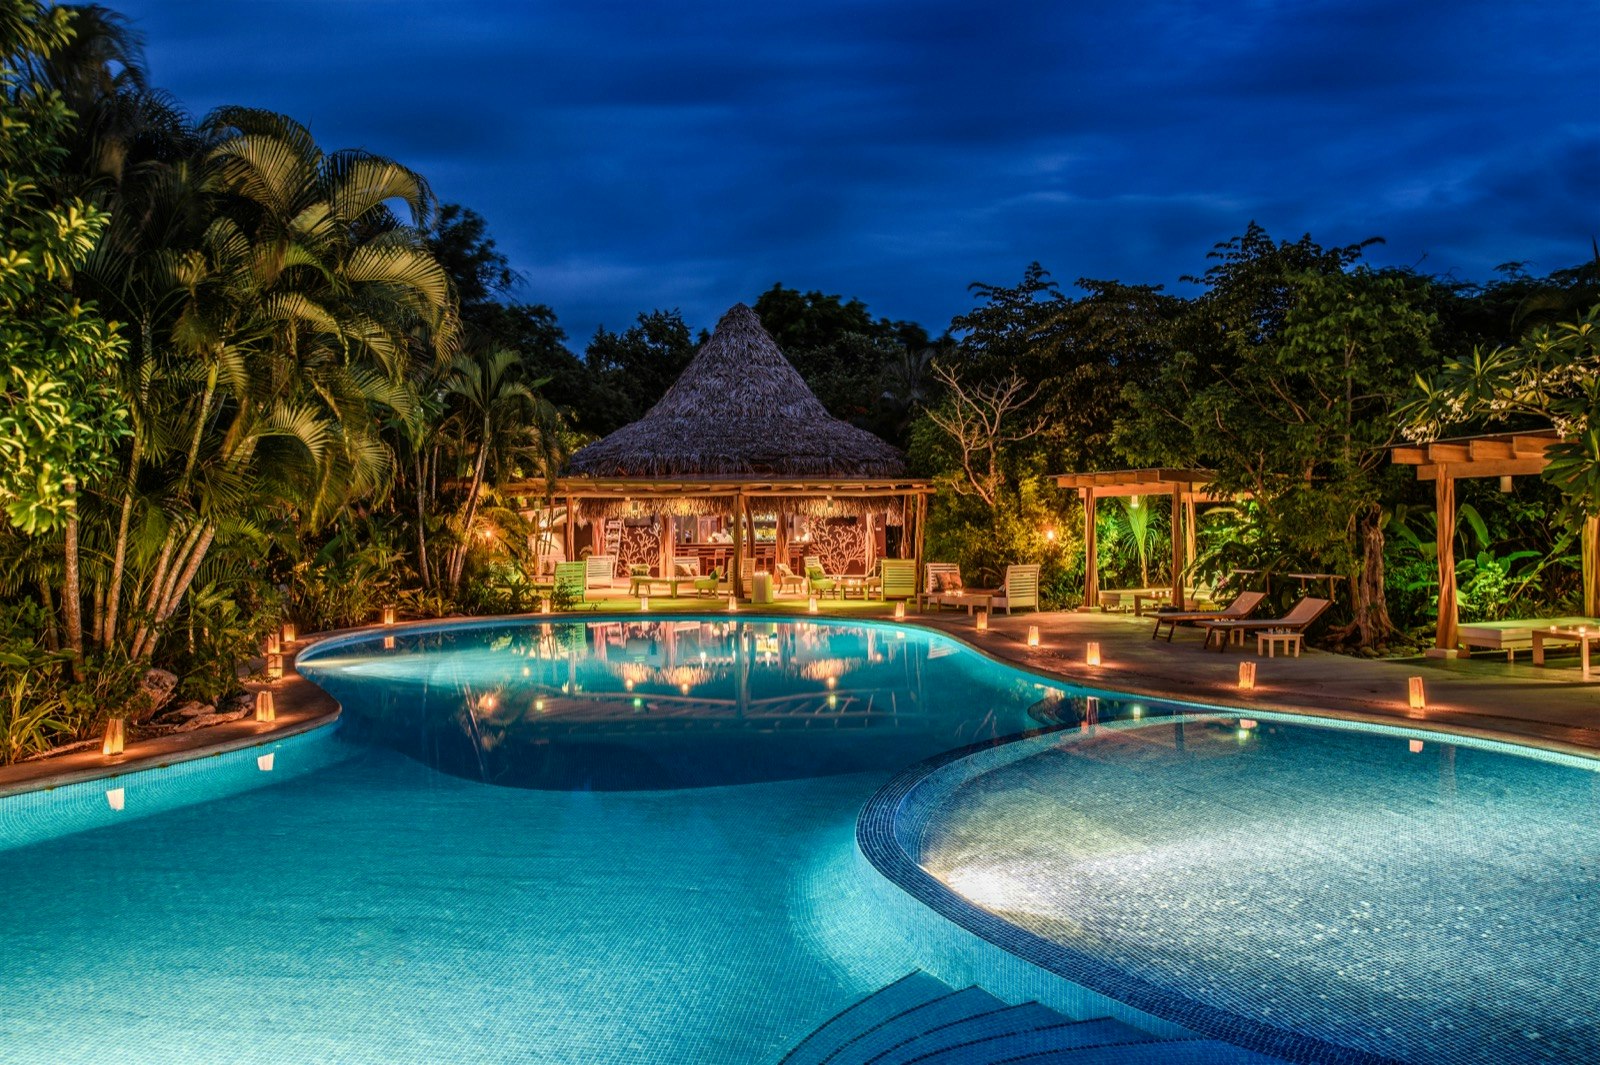 A large clear pool encircled by small lamps sits in front of a wooden pool-side restaurant; eco luxury resorts